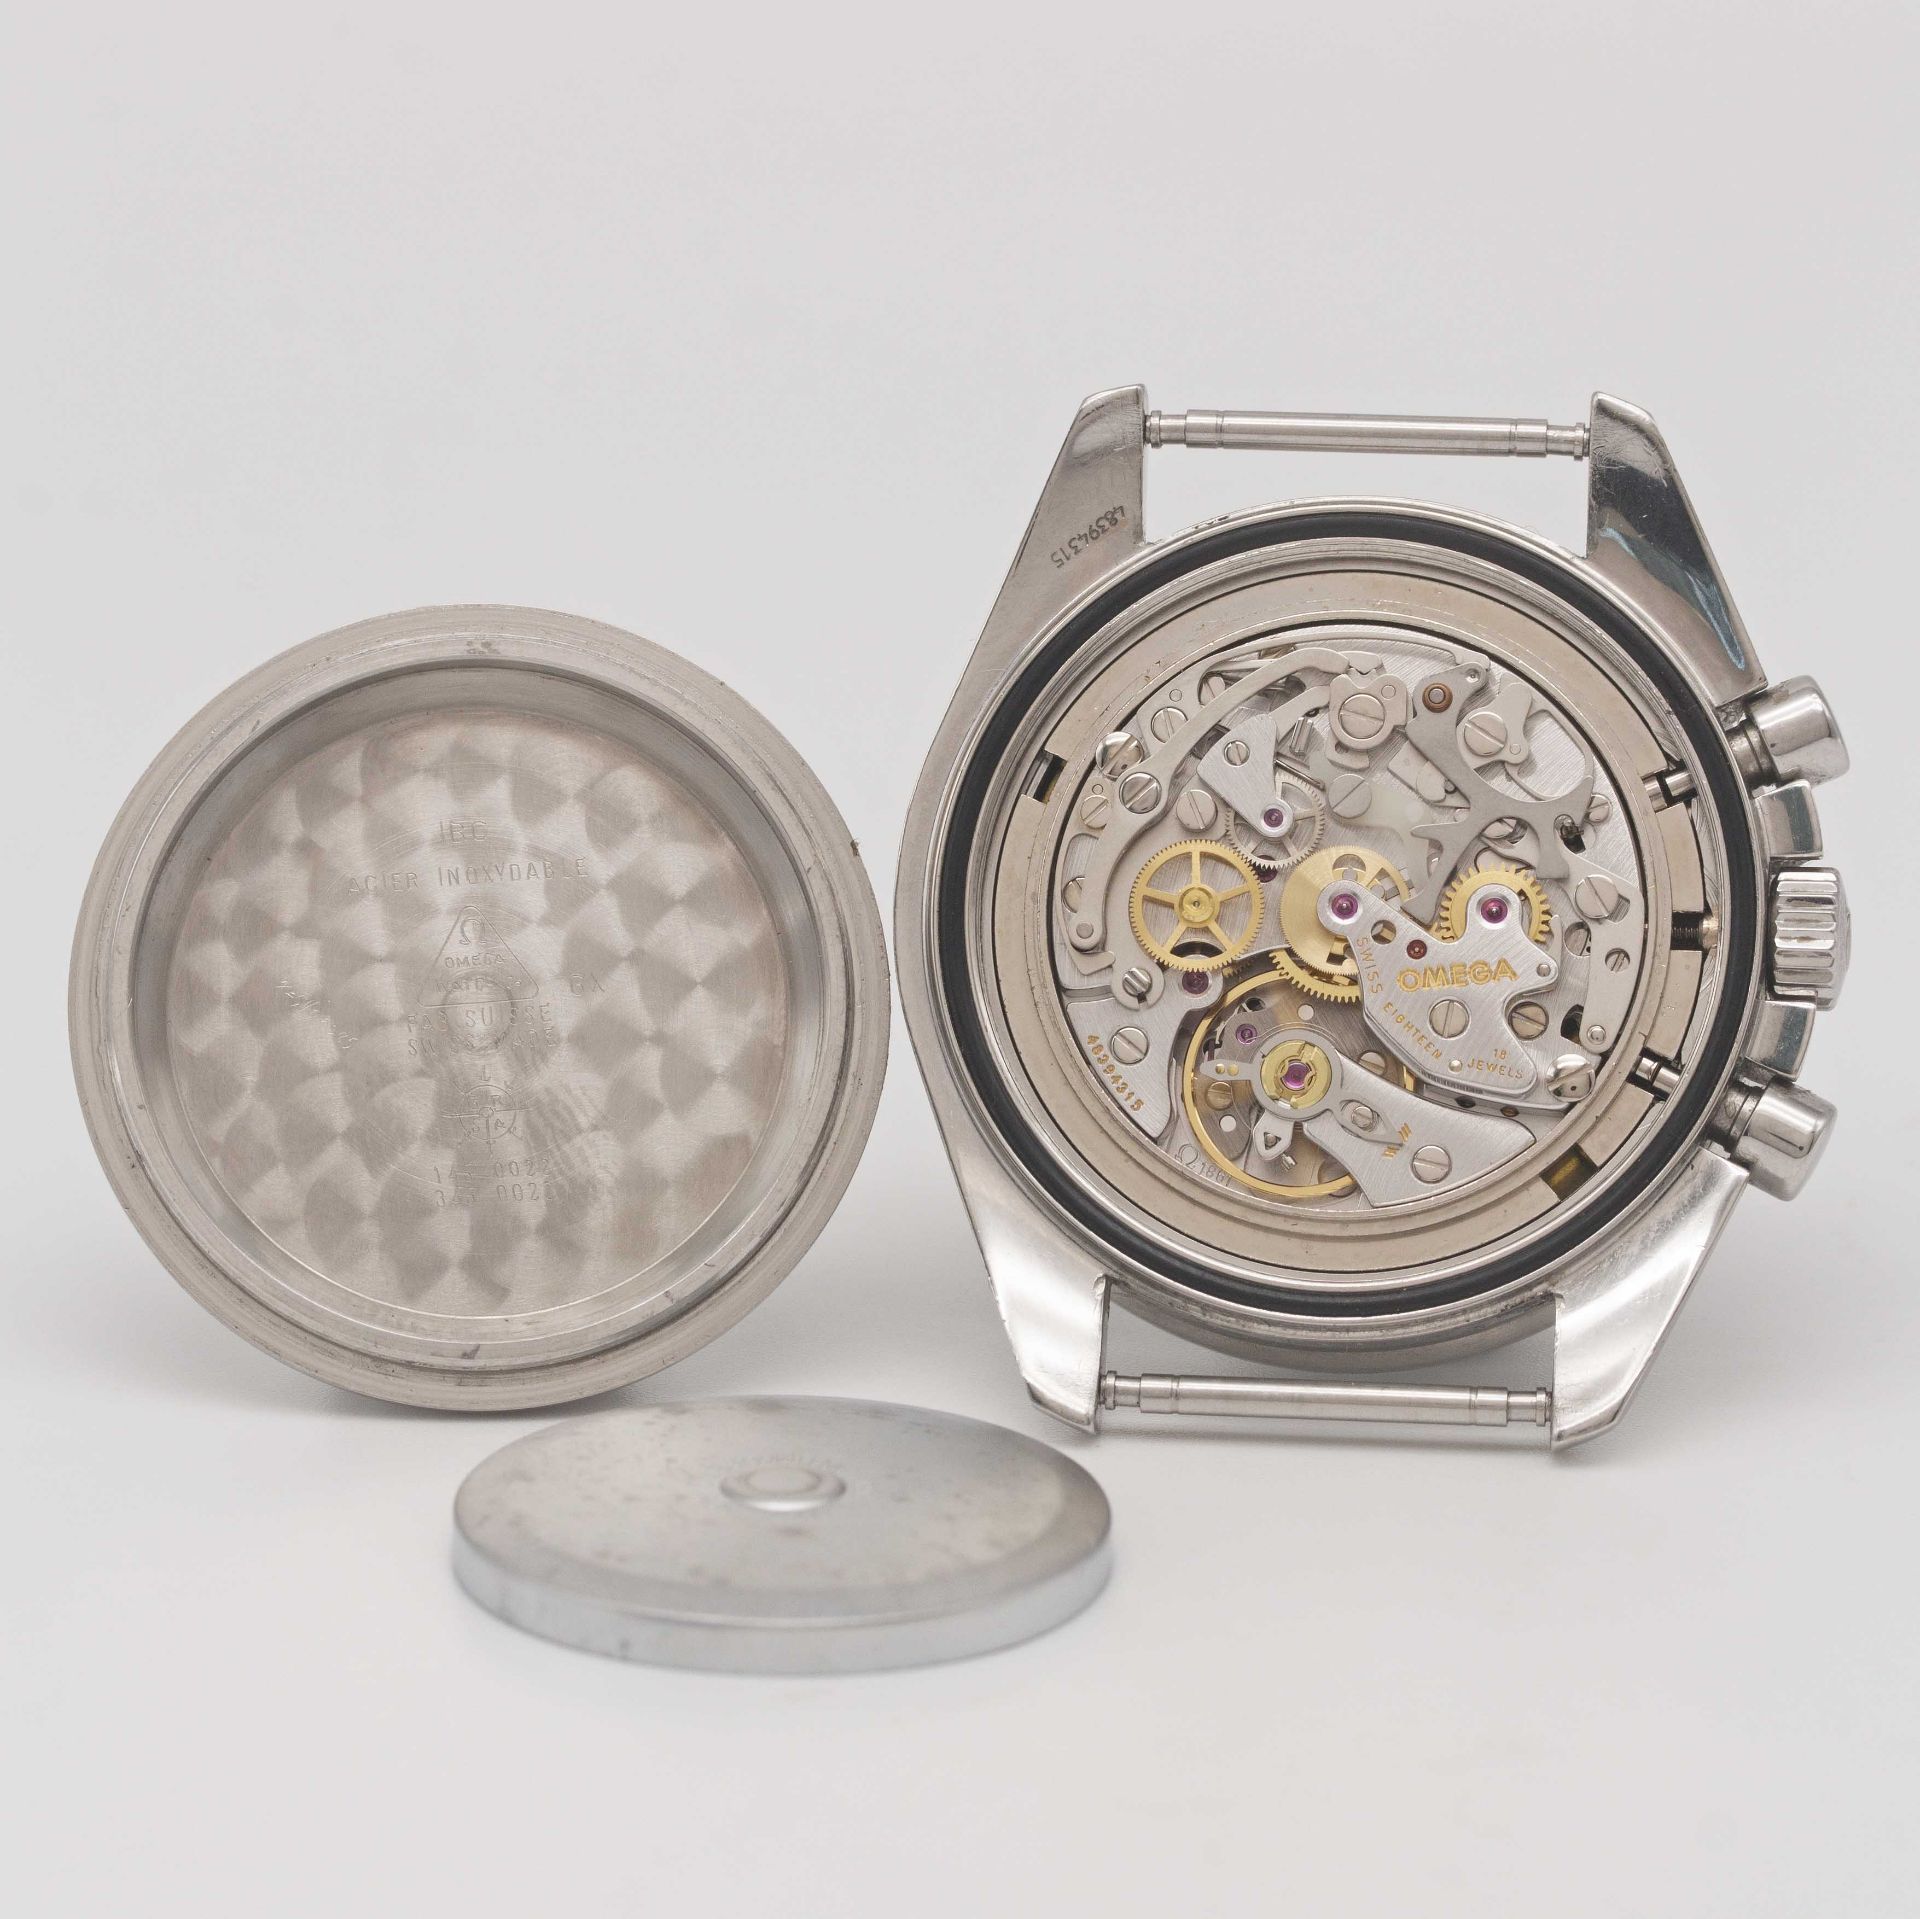 A GENTLEMAN'S STAINLESS STEEL OMEGA SPEEDMASTER PROFESSIONAL CHRONOGRAPH WRIST WATCH CIRCA 2000, - Image 7 of 9